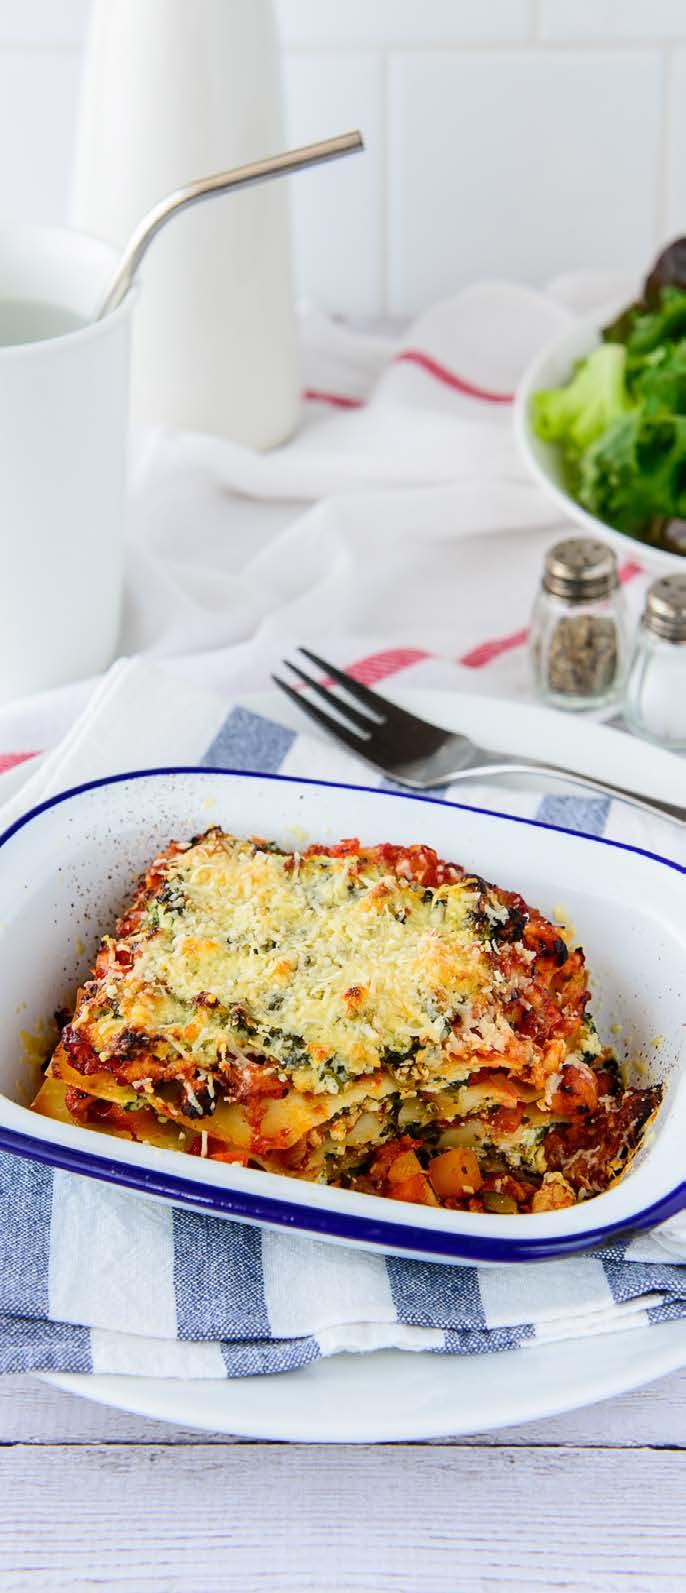 CHICKEN & VEGETABLE LASAGNE Ingredients (Makes 4 serves) l 2 tsp extra virgin olive oil l 2 garlic cloves, crushed l 1 brown onion, diced l 200g lean chicken mince l 1 zucchini, diced or grated l 1